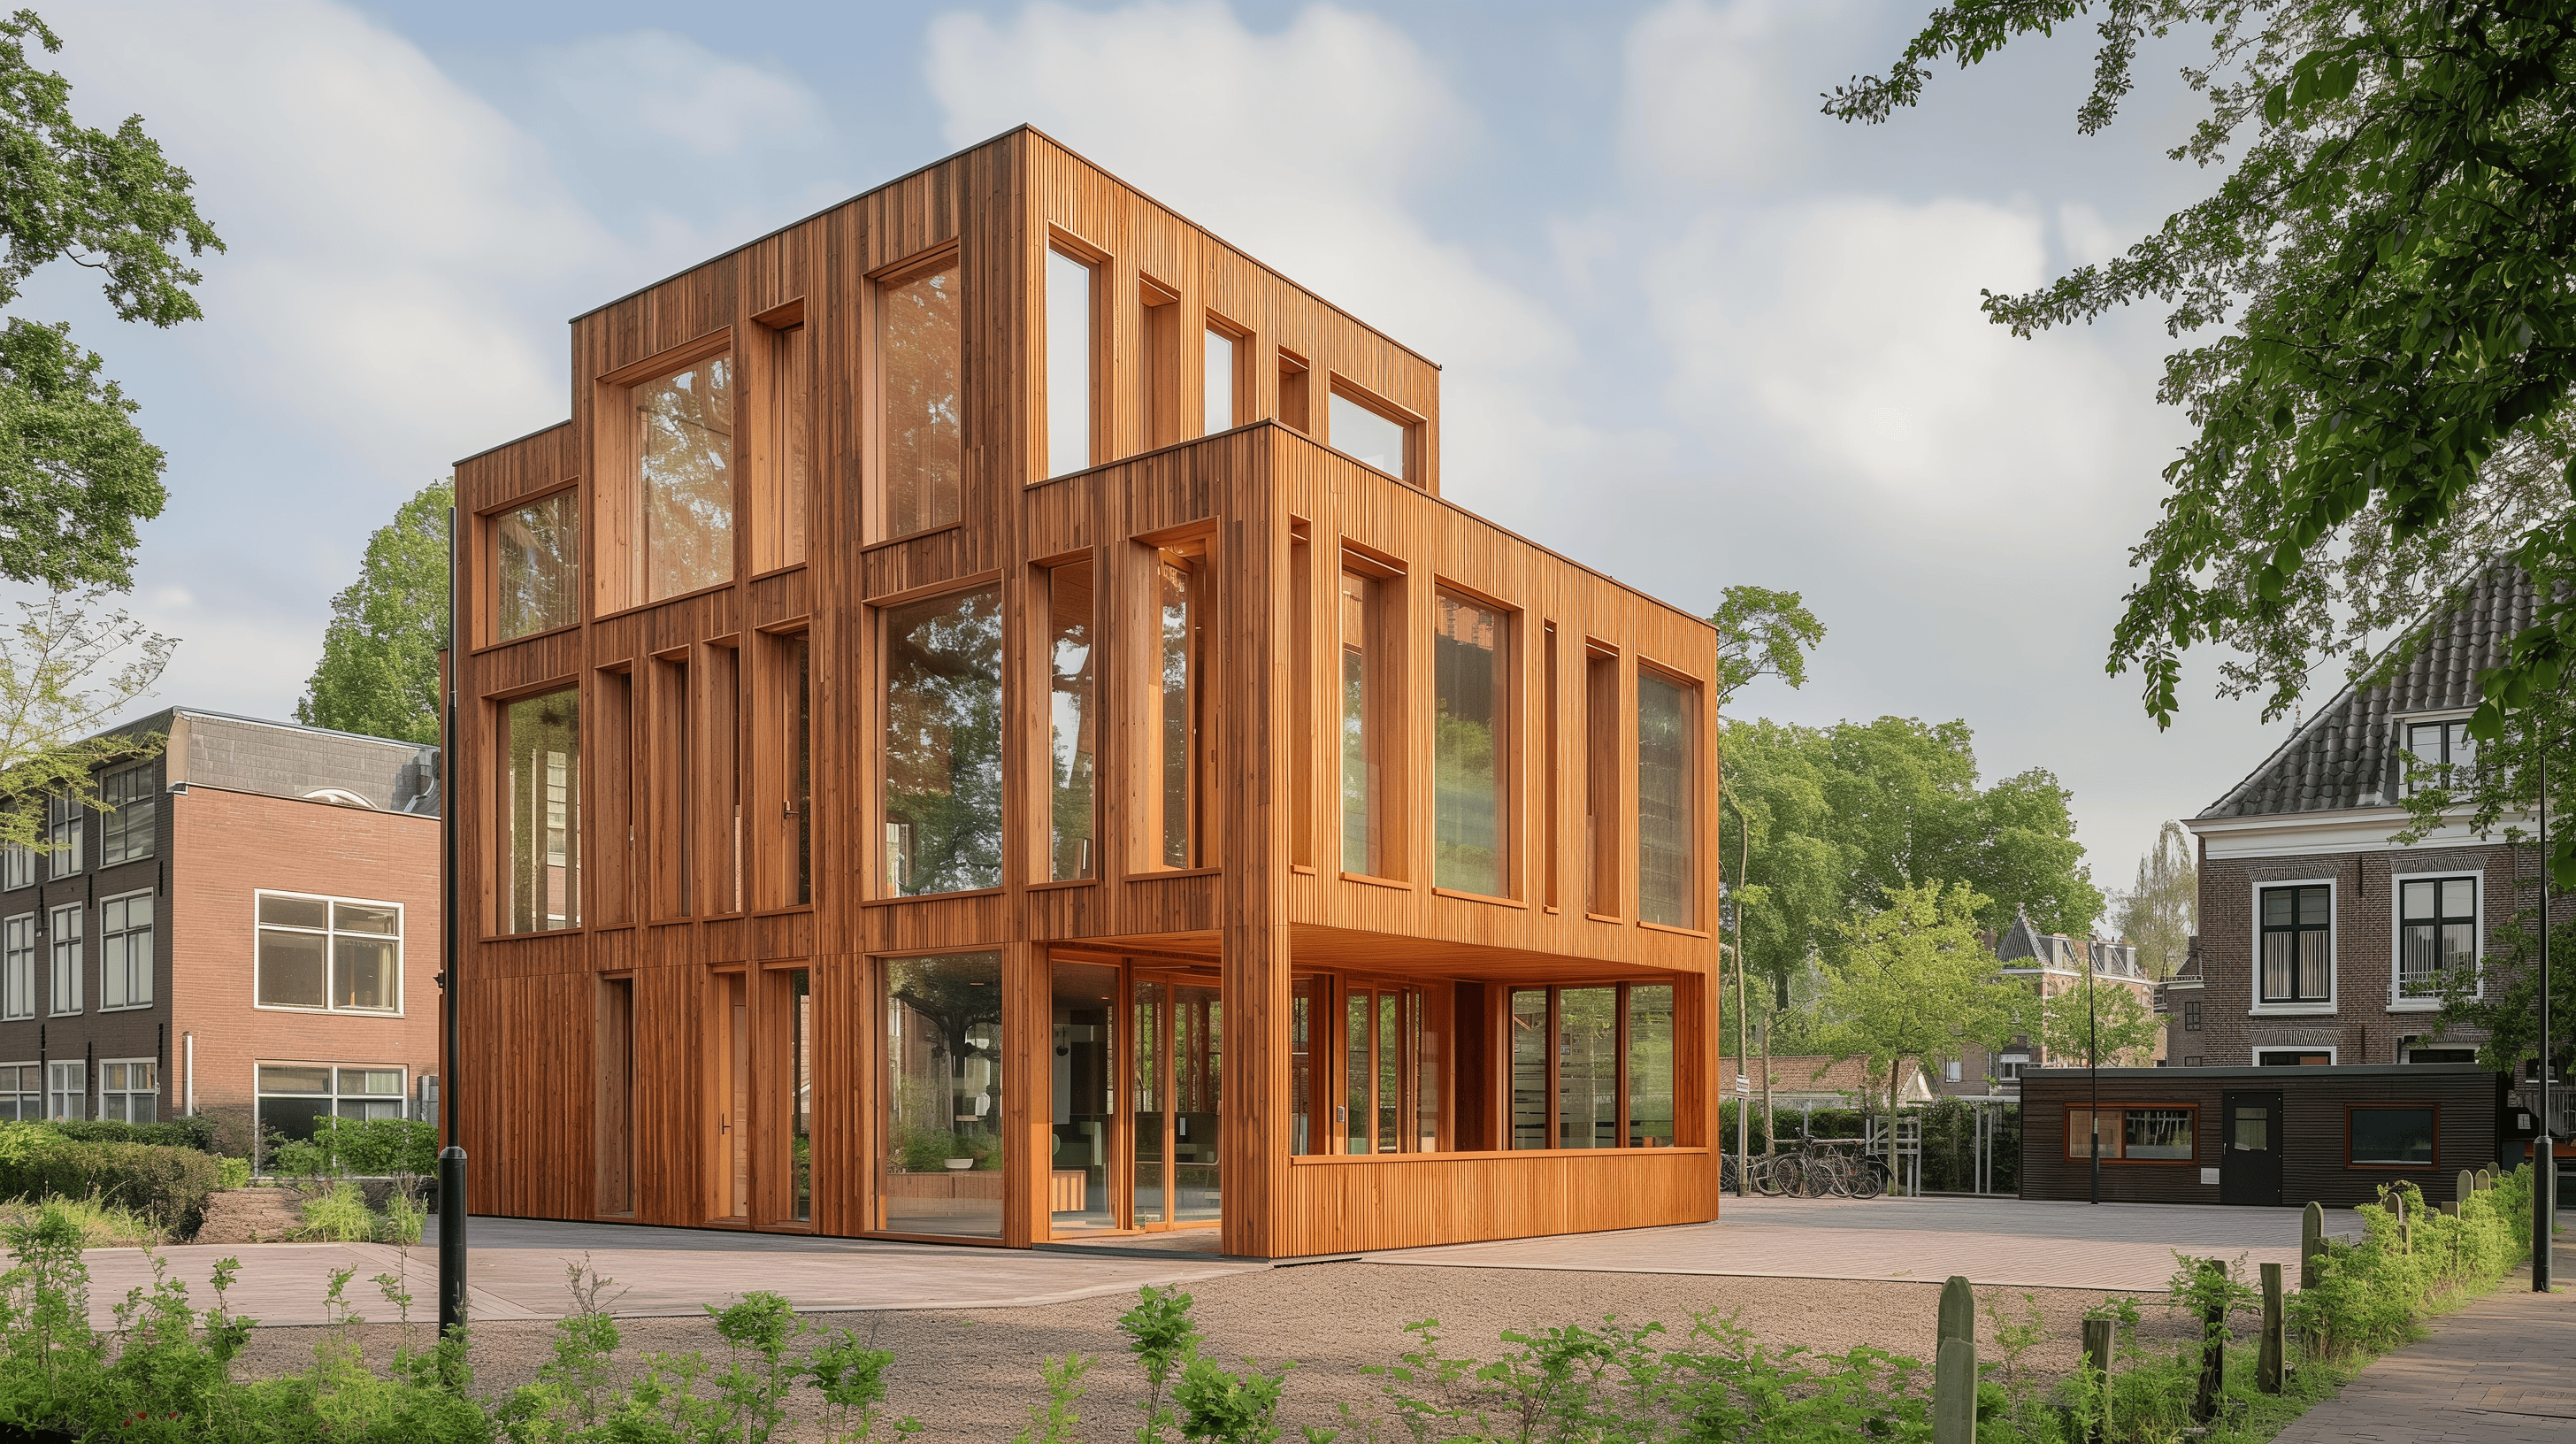 innovationorigins_biobased_building_made_with_wood_and_straw_in_9227b4f8-3c33-4ae7-9317-5c68bd5682f4